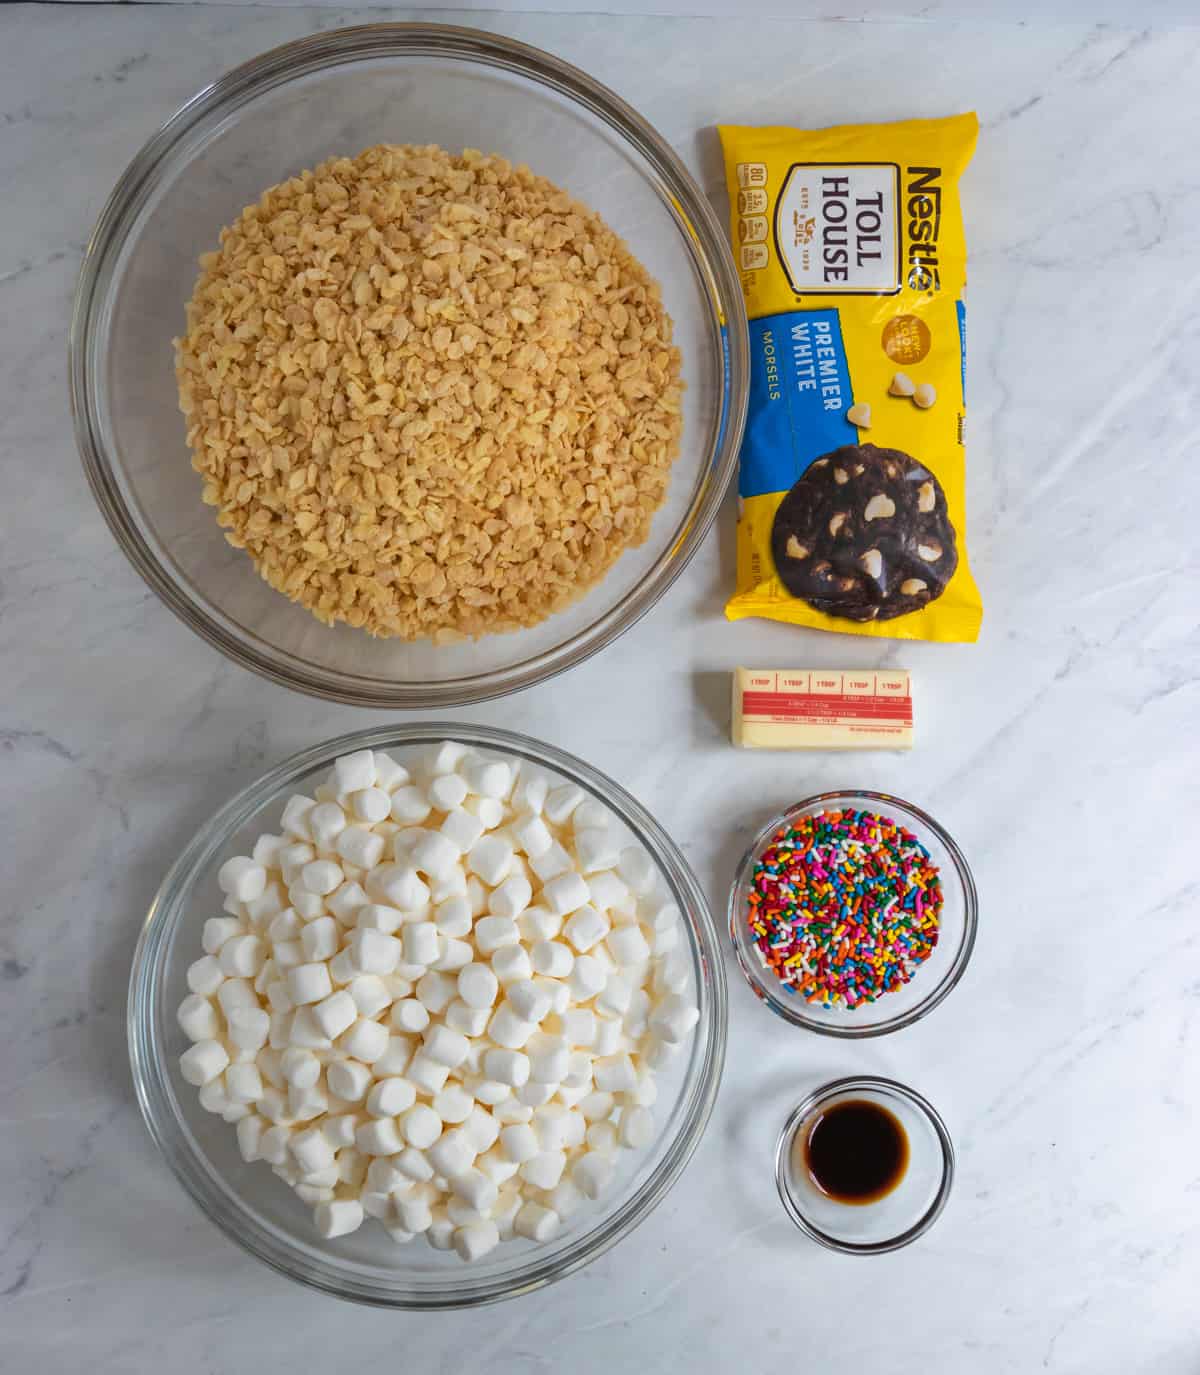 Cereal, marshmallows, sprinkles, white chocolate and ingredients on counter.